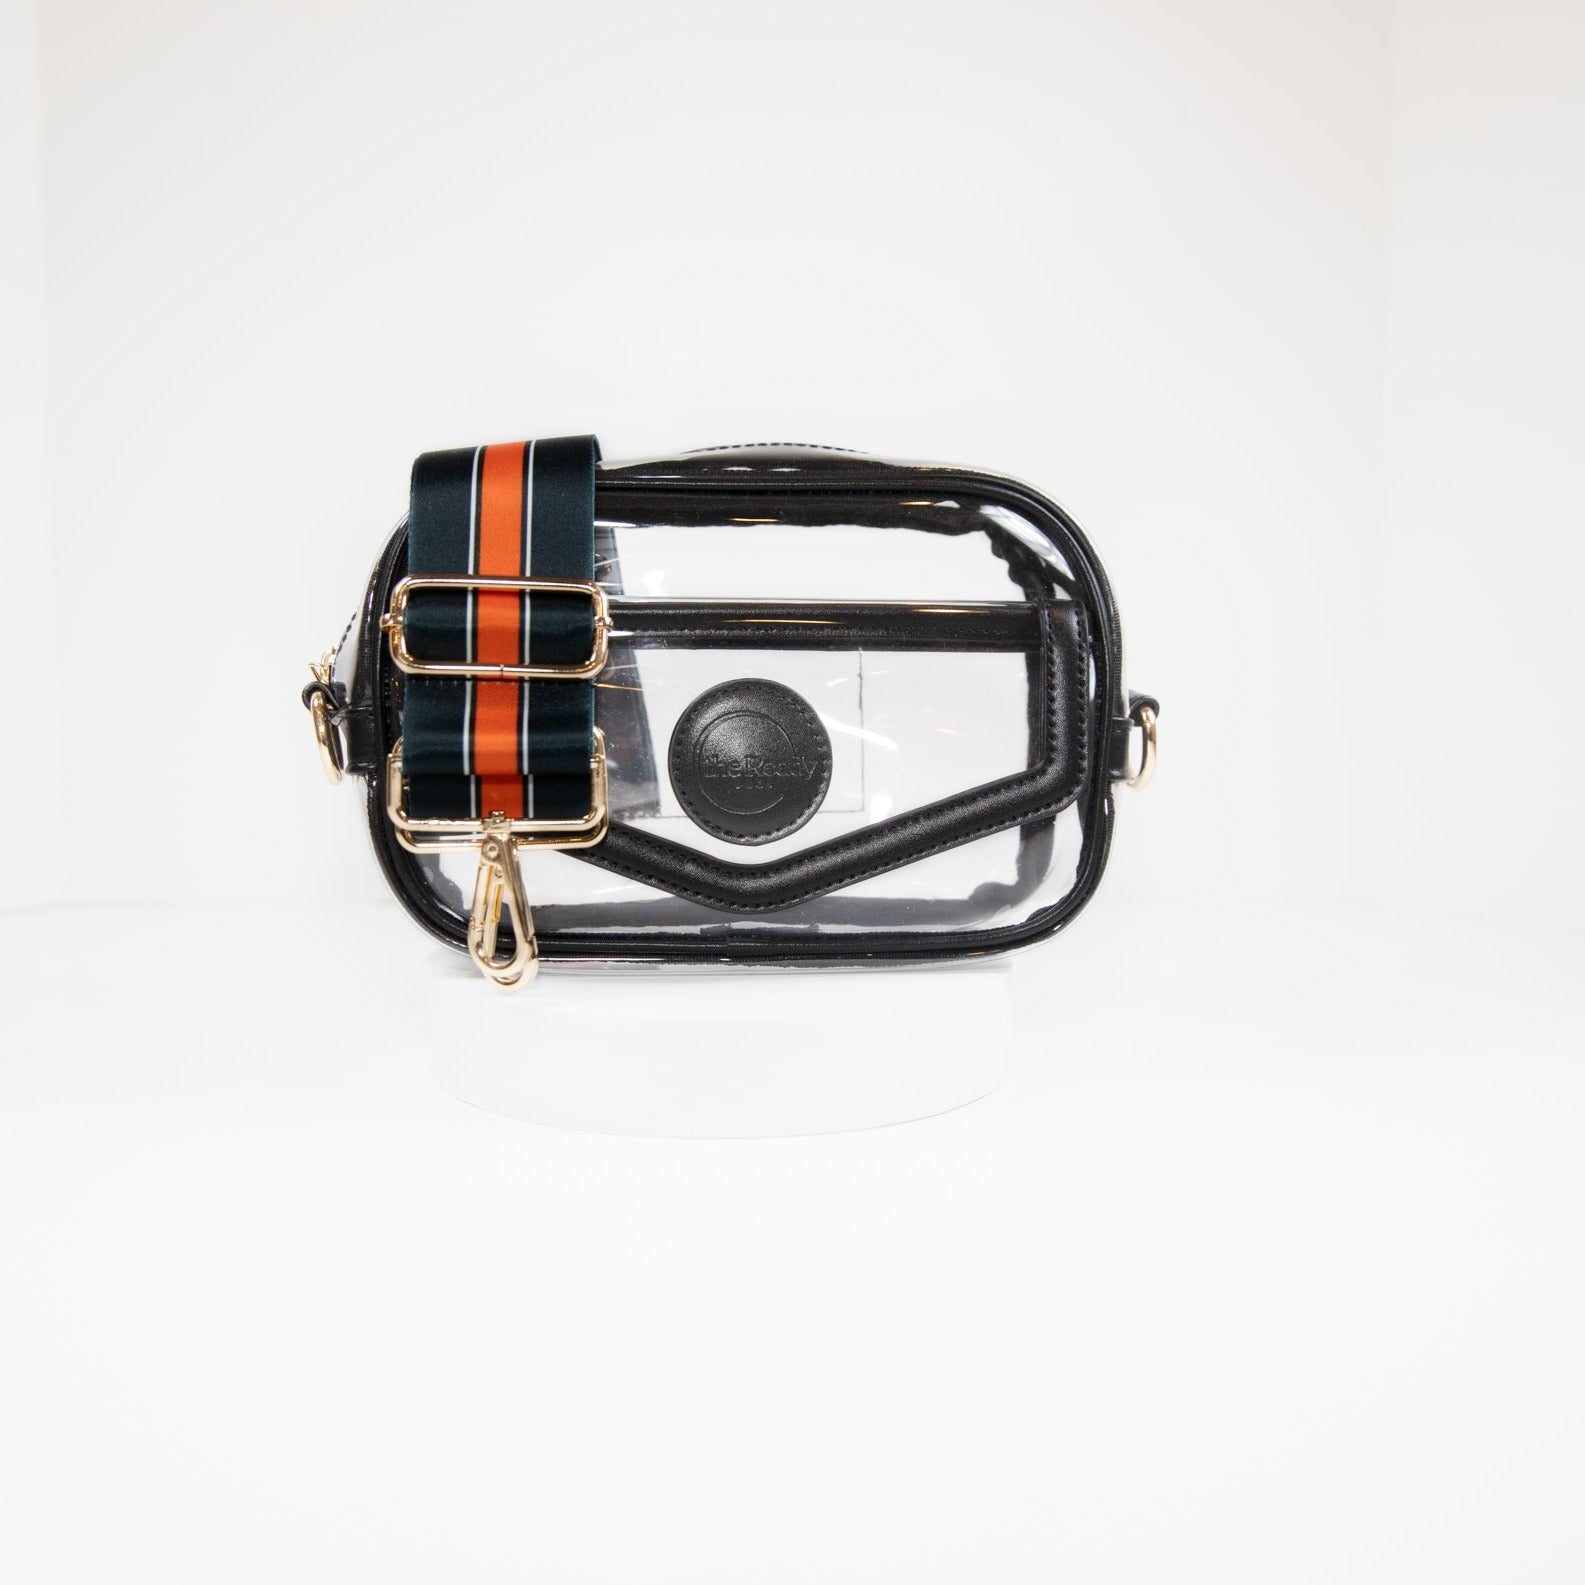 Clear stadium bag with black leather trim, front facing, with a crossbody strap in Chicago Bears team colors.